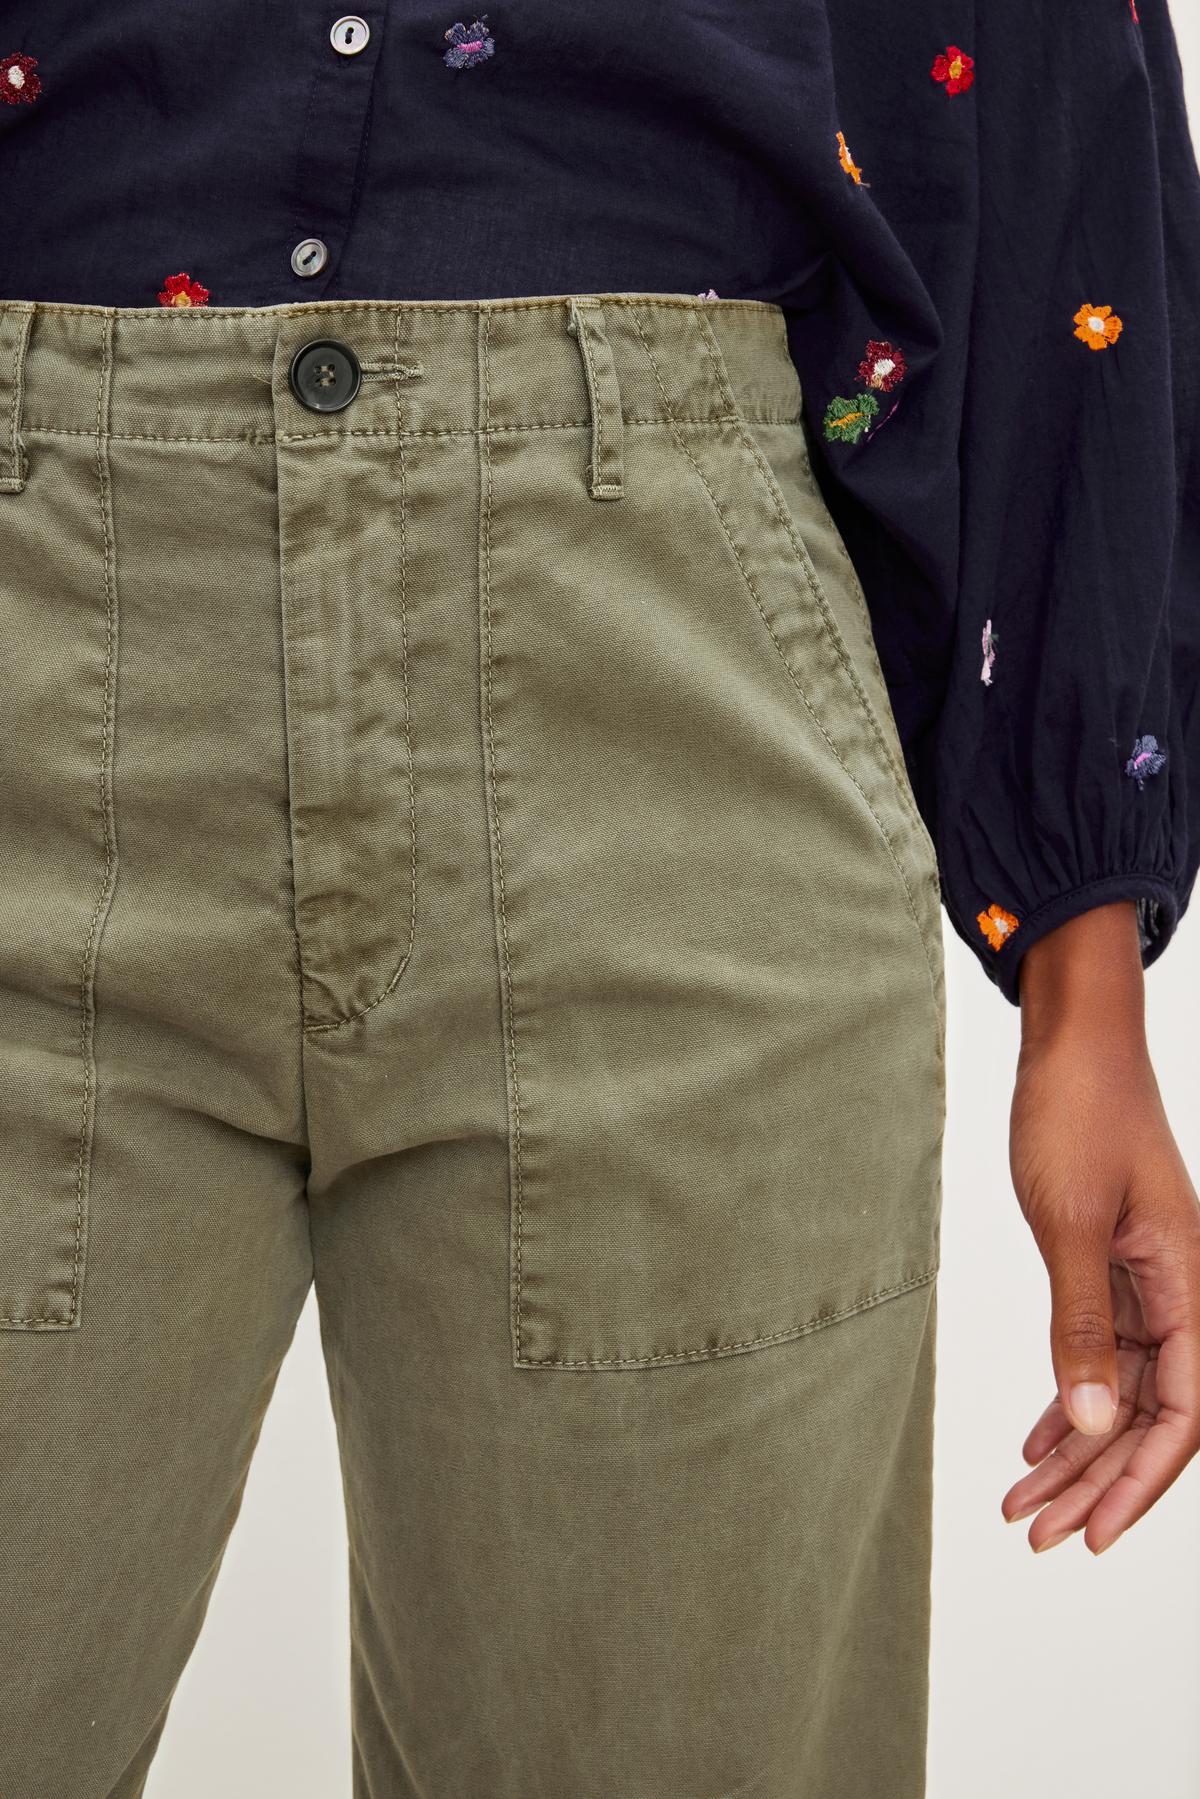 Close-up of a person wearing Velvet by Graham & Spencer's MYA COTTON CANVAS PANT and a black shirt with floral embroidery, focusing on the pants and a hand by the side.-36425663545537